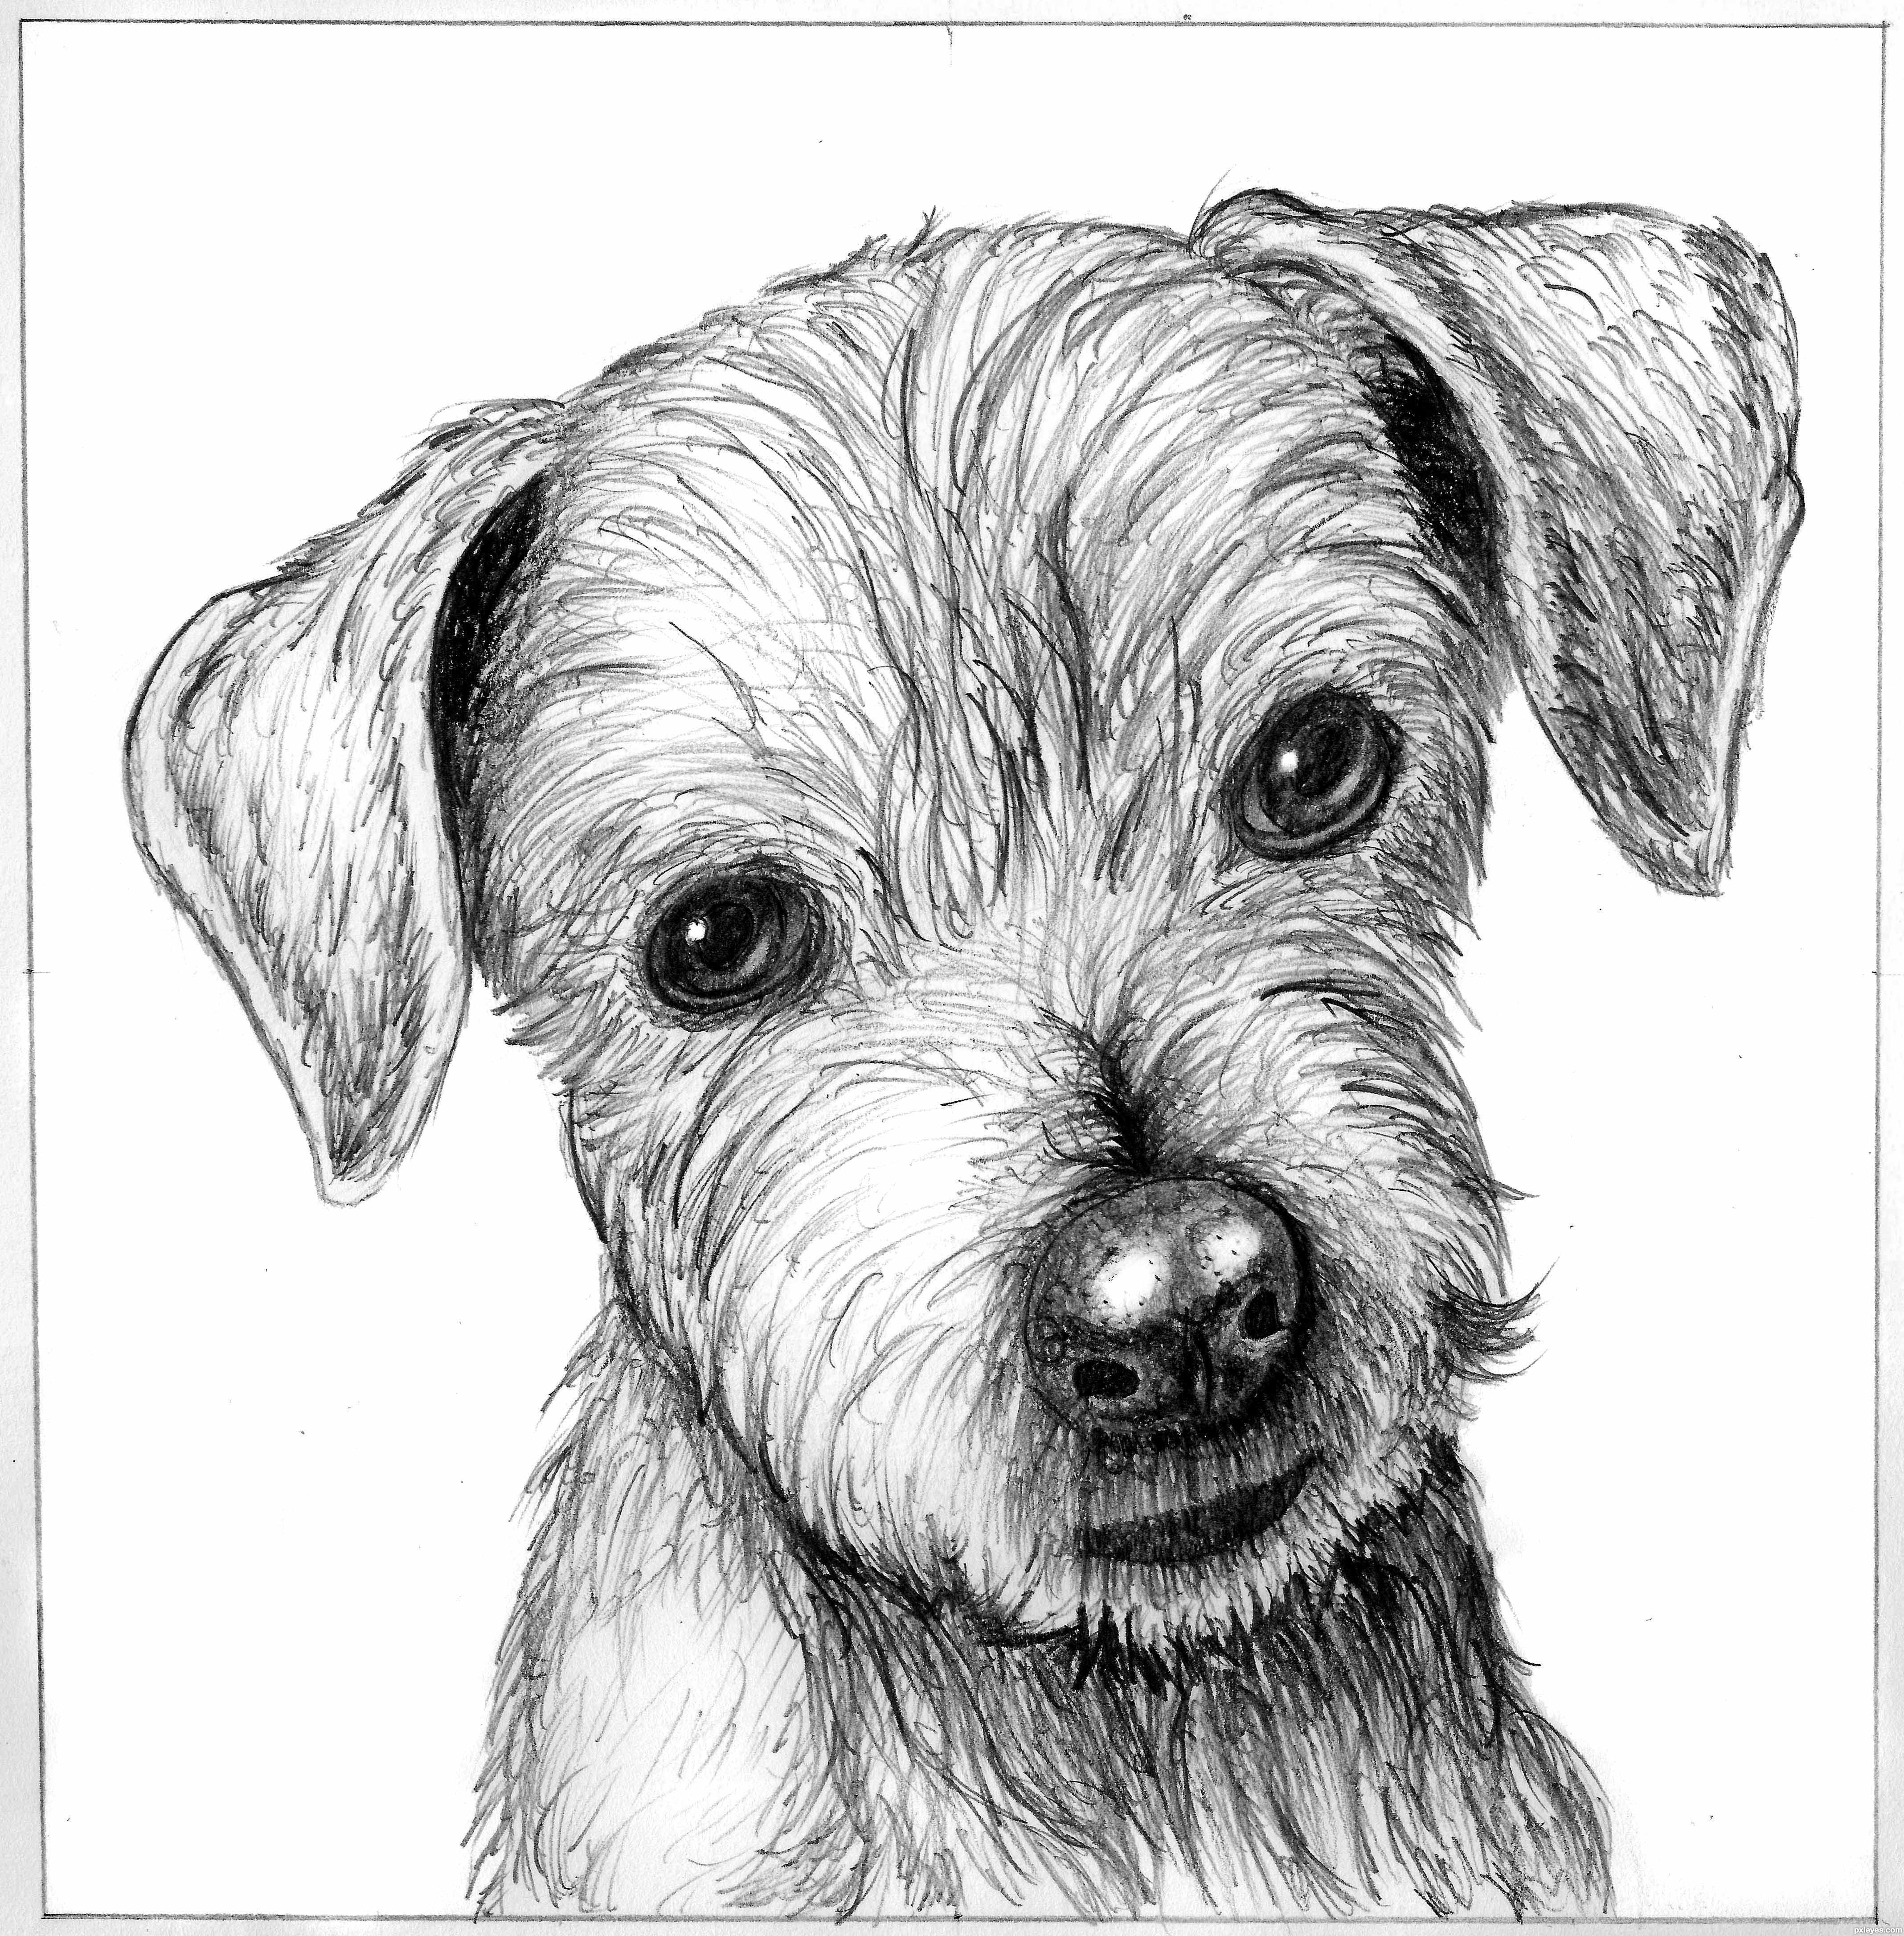 Dog's Sketch picture, by rssatnam for: line work drawing contest - Pxleyes.com